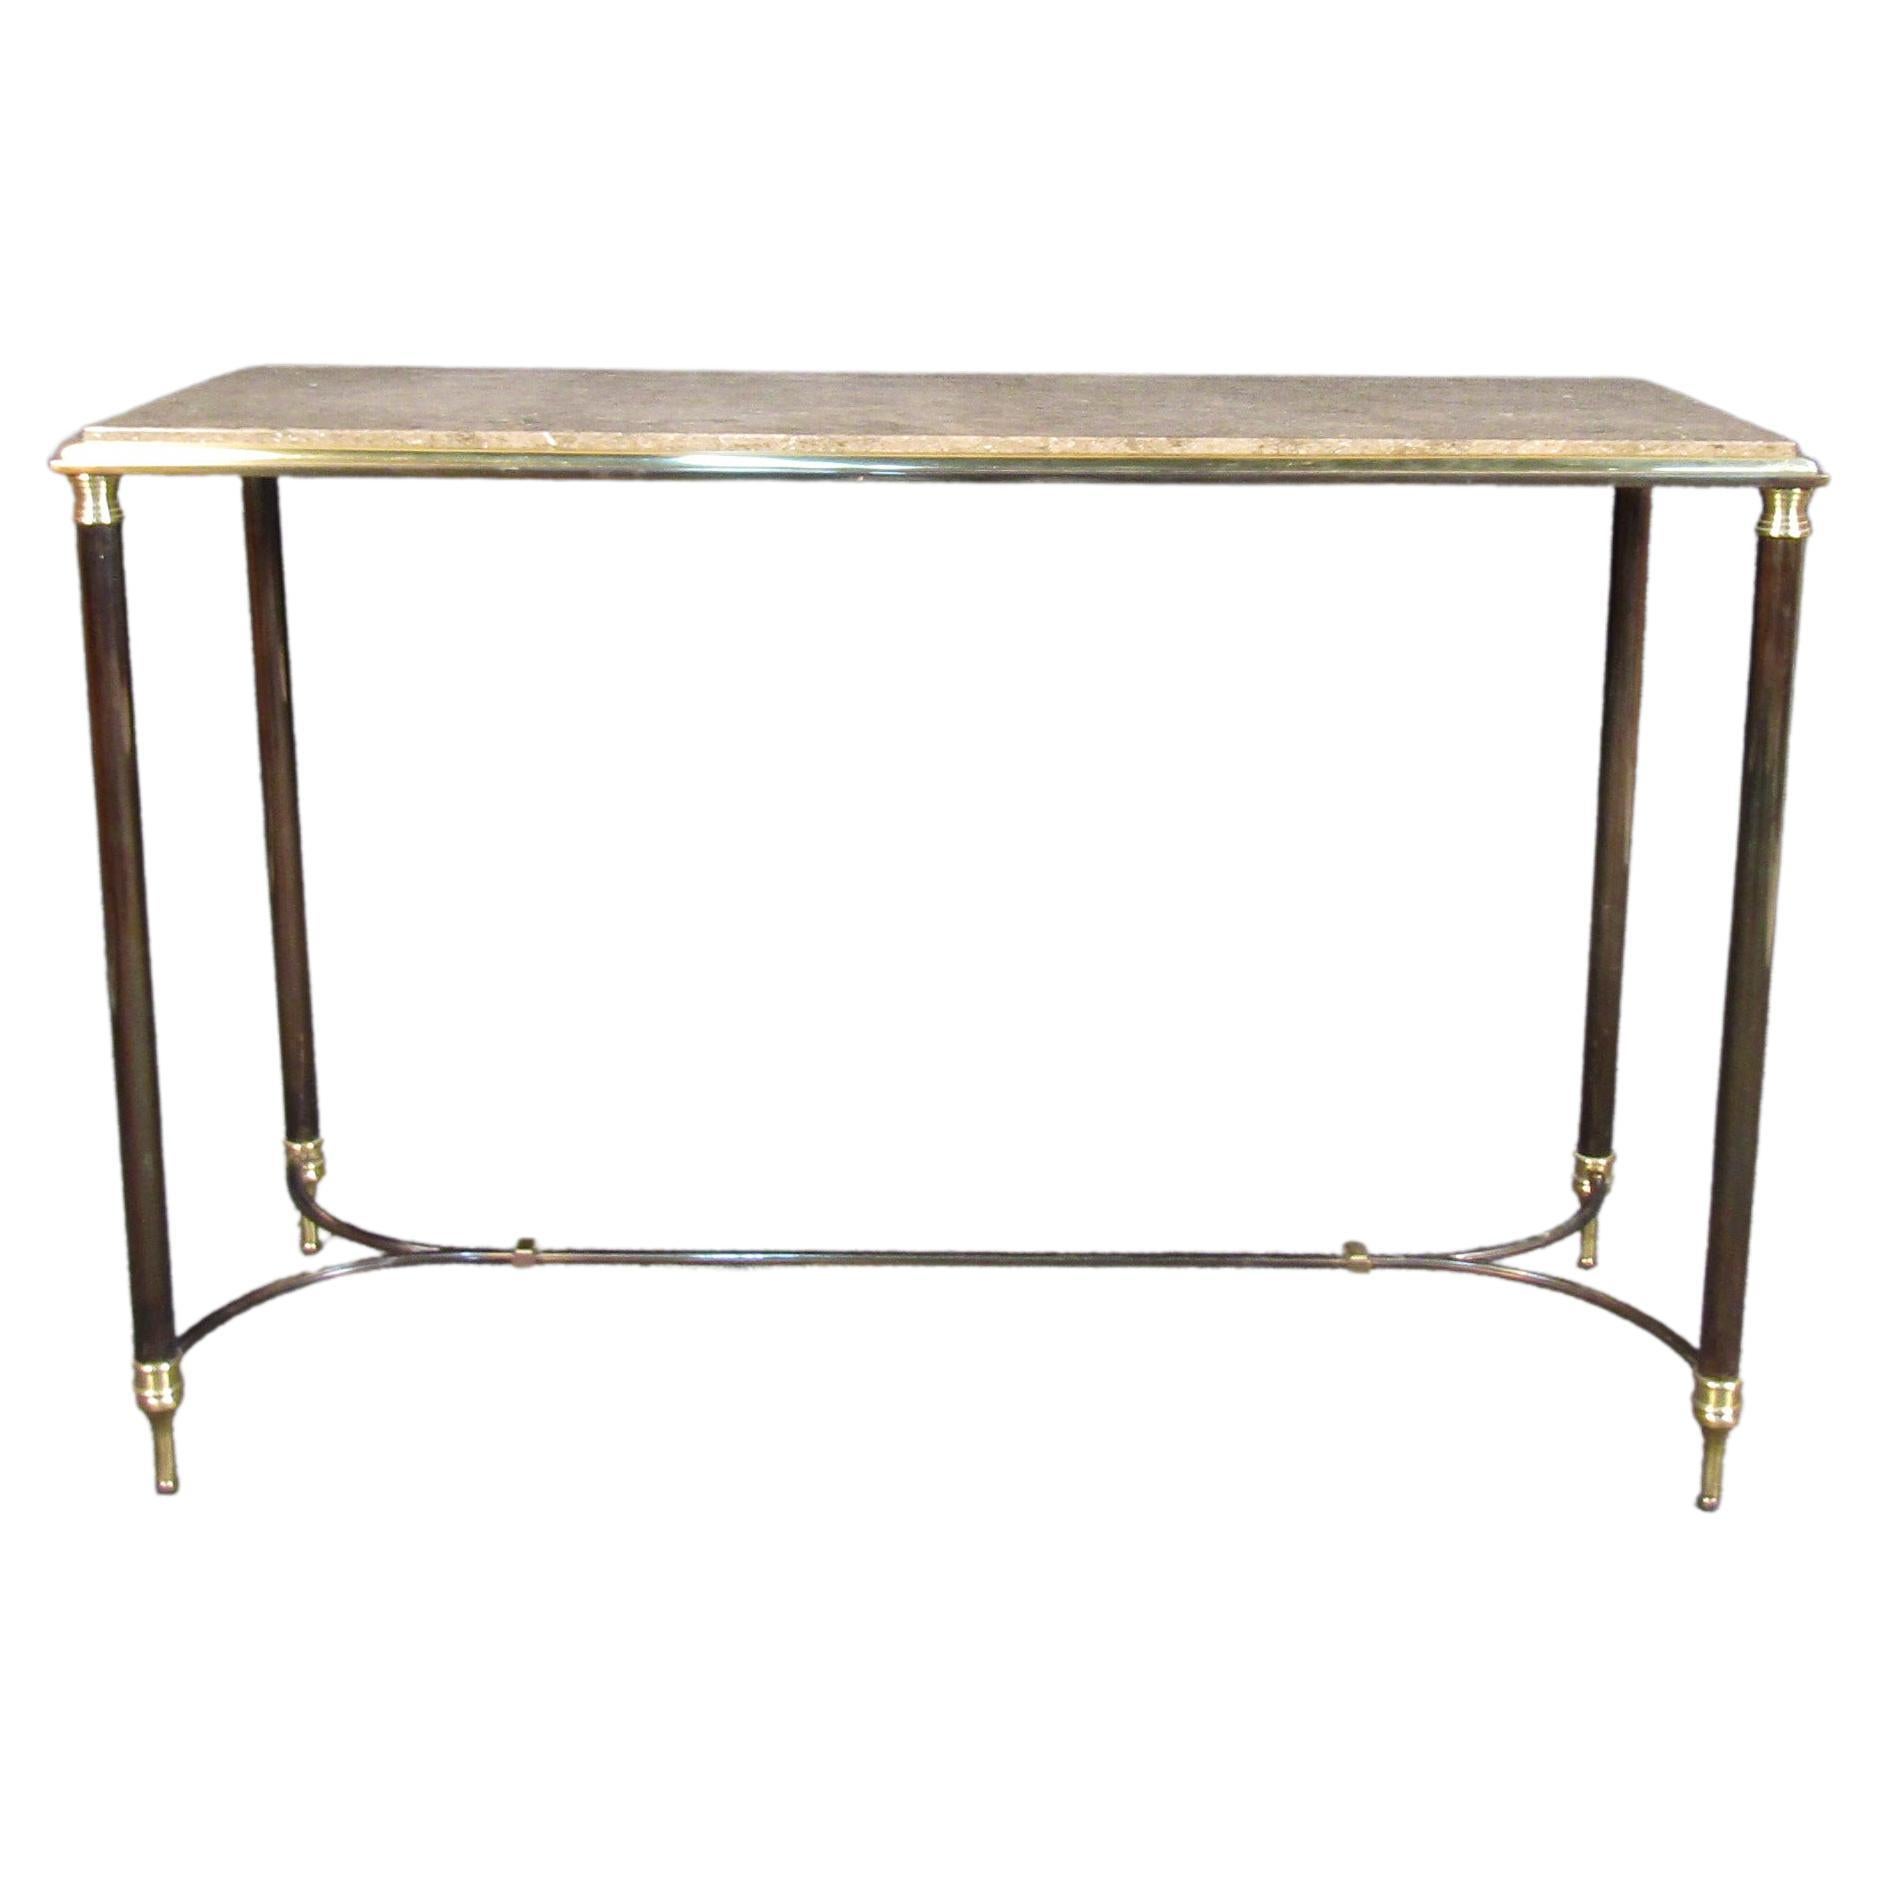 Vintage metal and marble console Table. This table features ornate metal frame, legs and accenting. The beautiful beveled edge leading up to the marble surface top is an eye catching feature that would compliment any space it is put in. 
Please